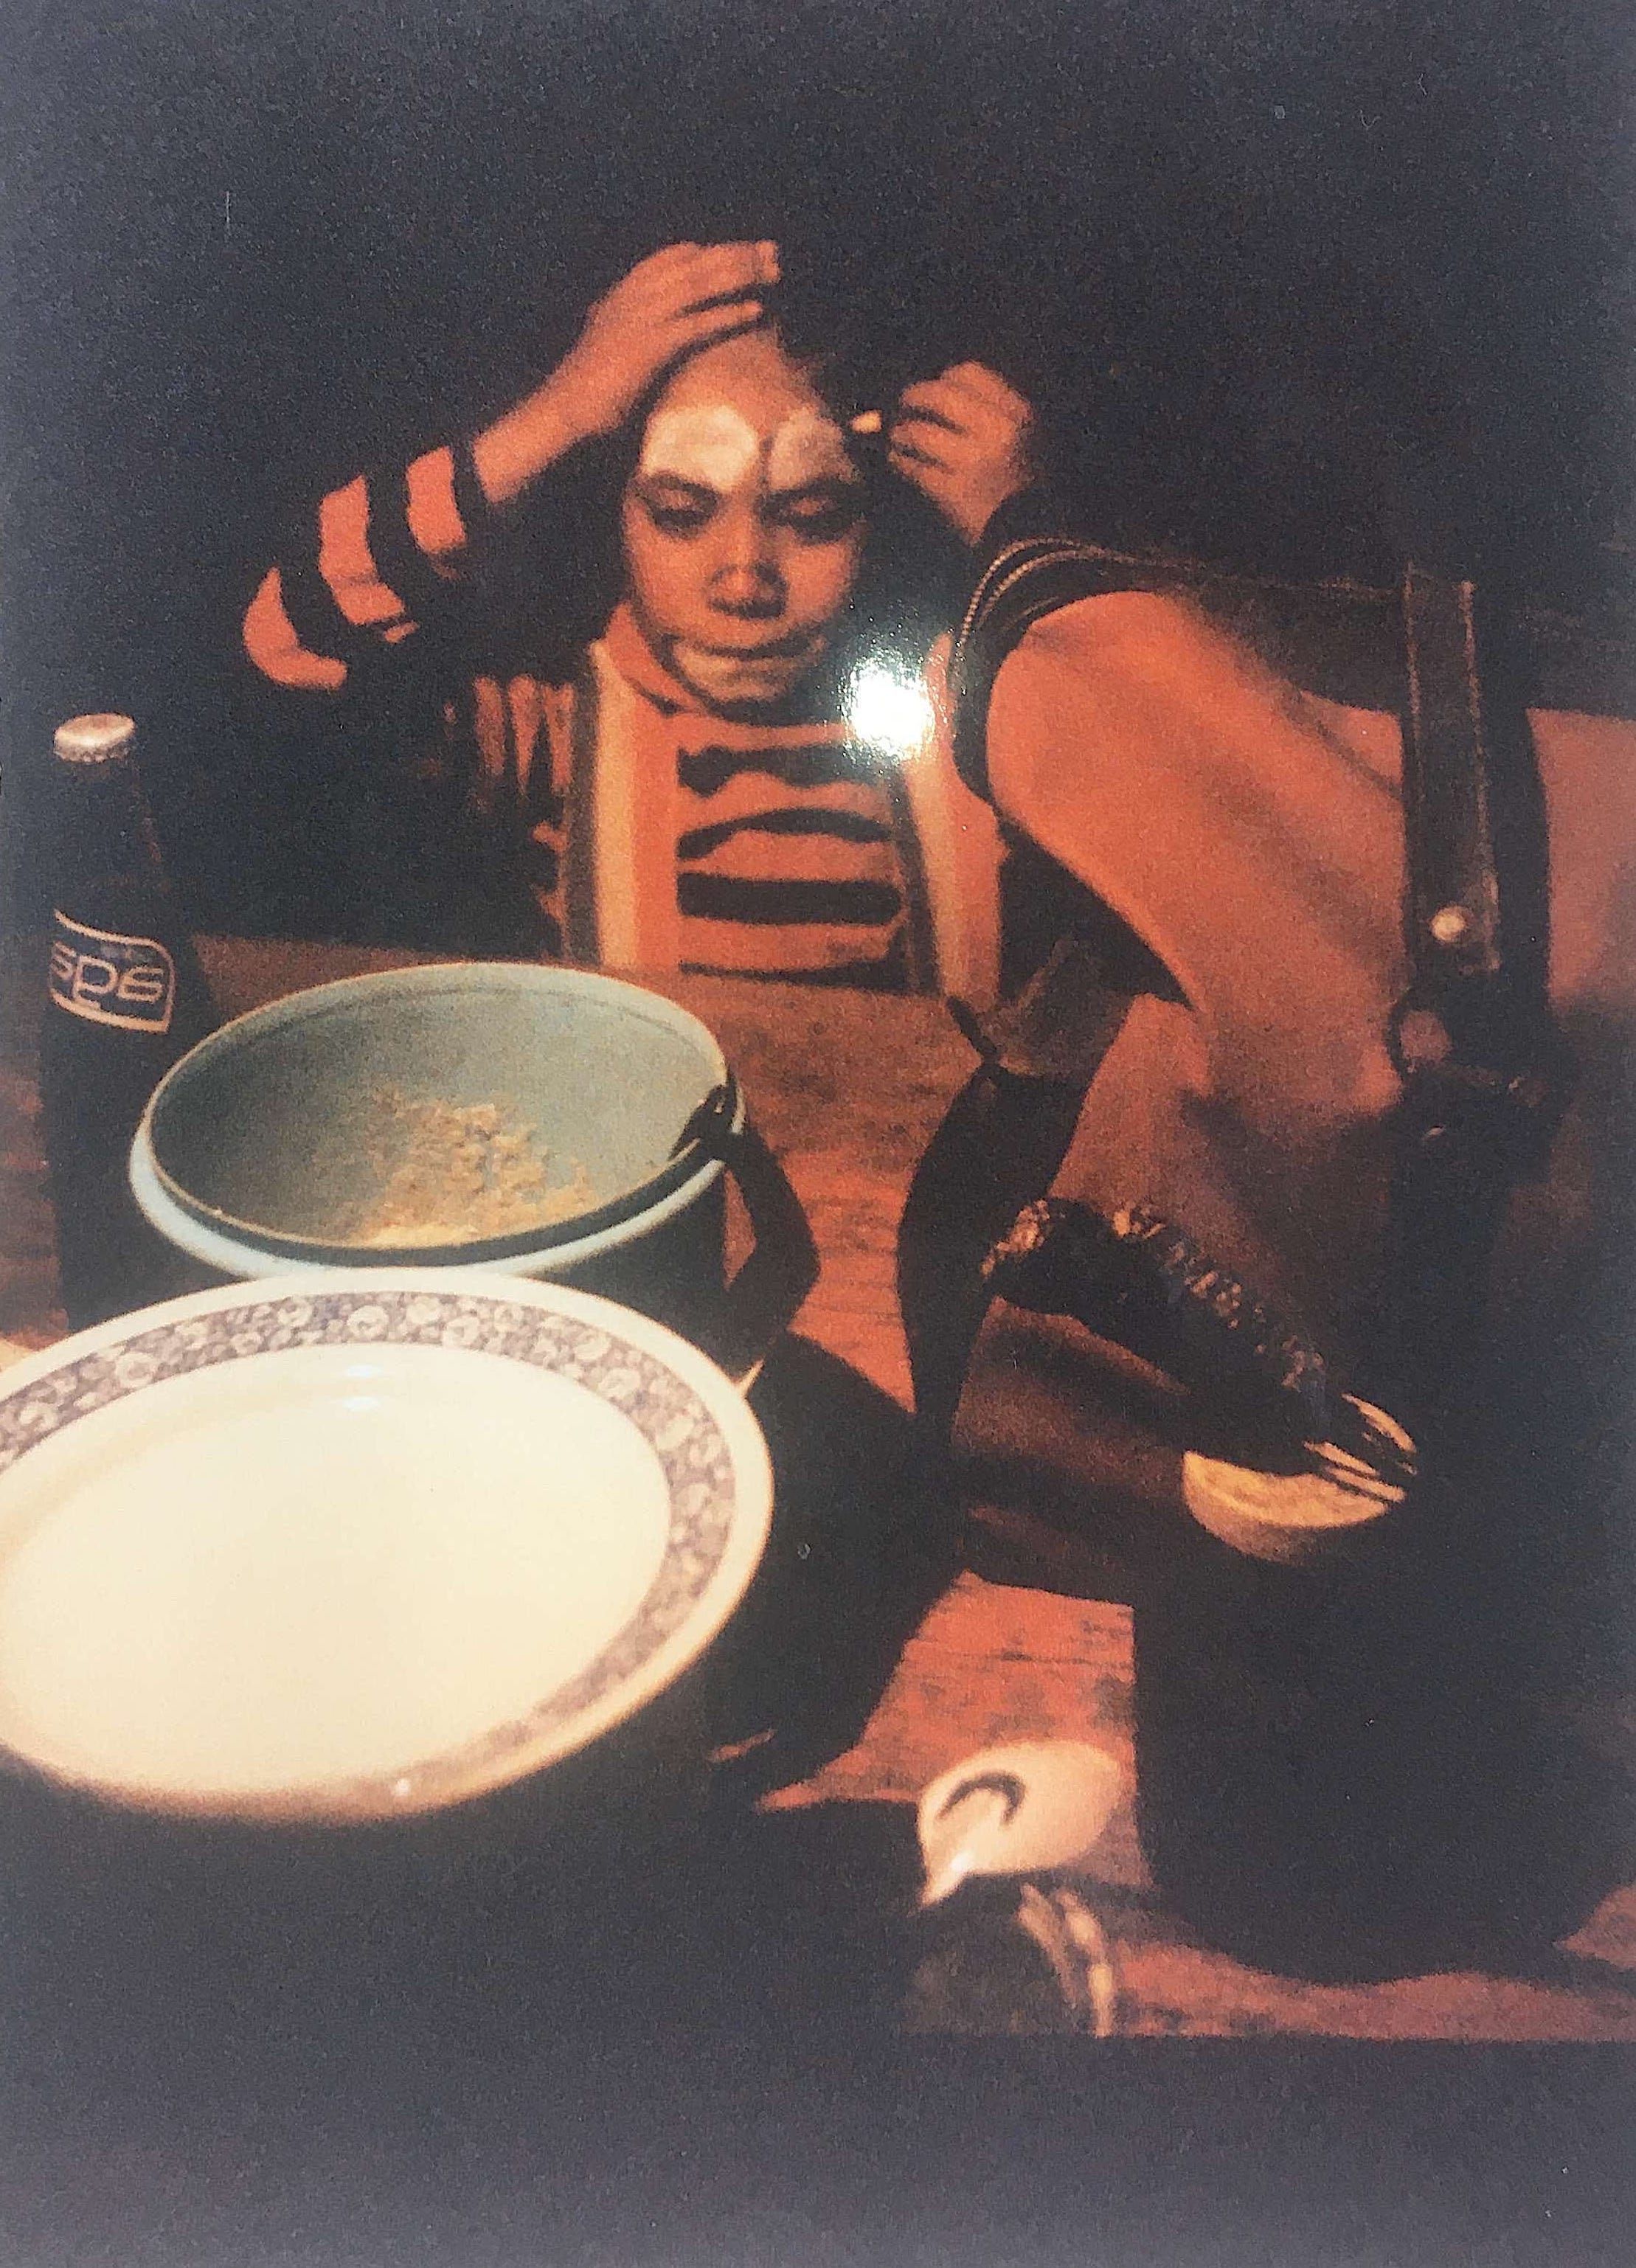 Young Gustavo (son of Victor) putting clown make up on Circo ideal on tour in Nayarit Jalisco Mexico. 1979.